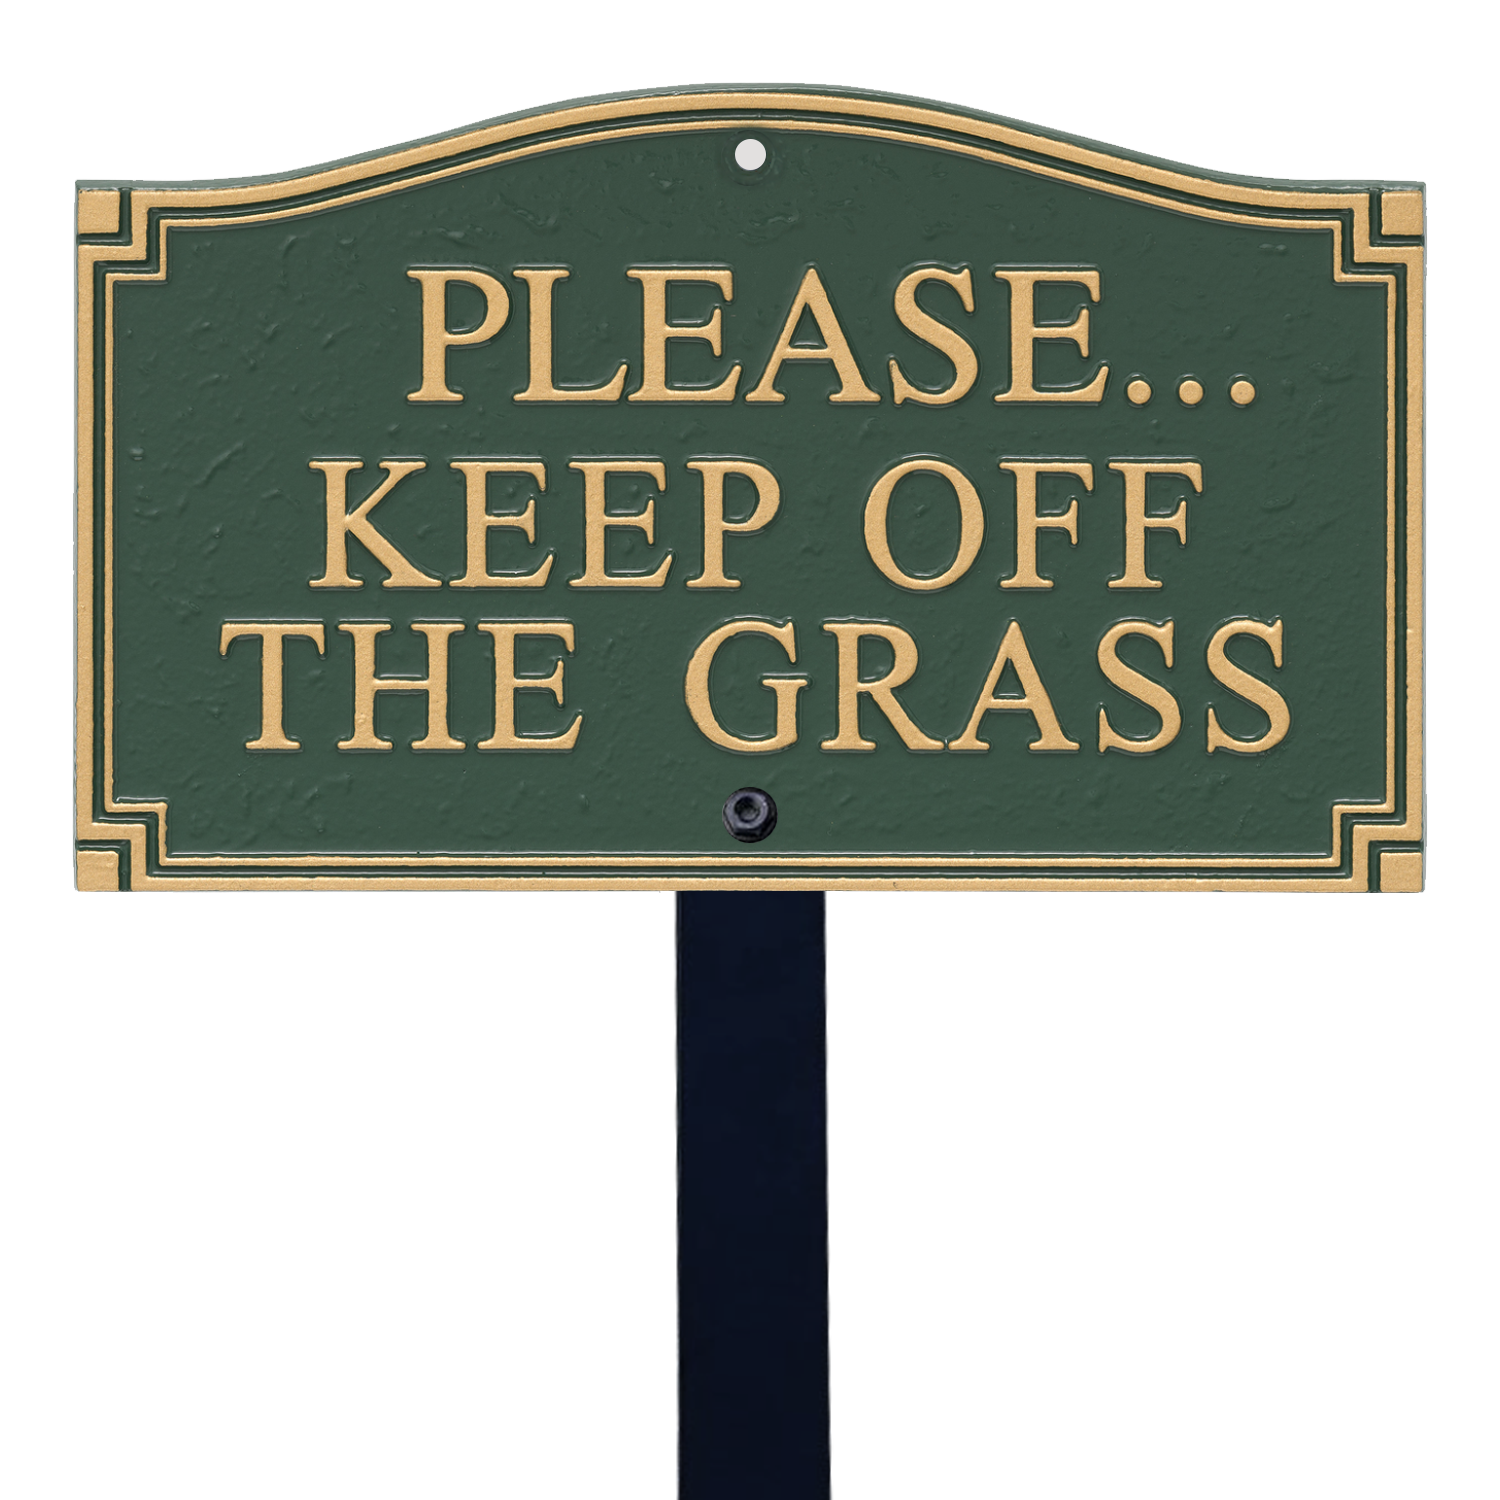 Green//White. Please Do Not Park On The Grass Aluminium Sign 400mm x 270mm